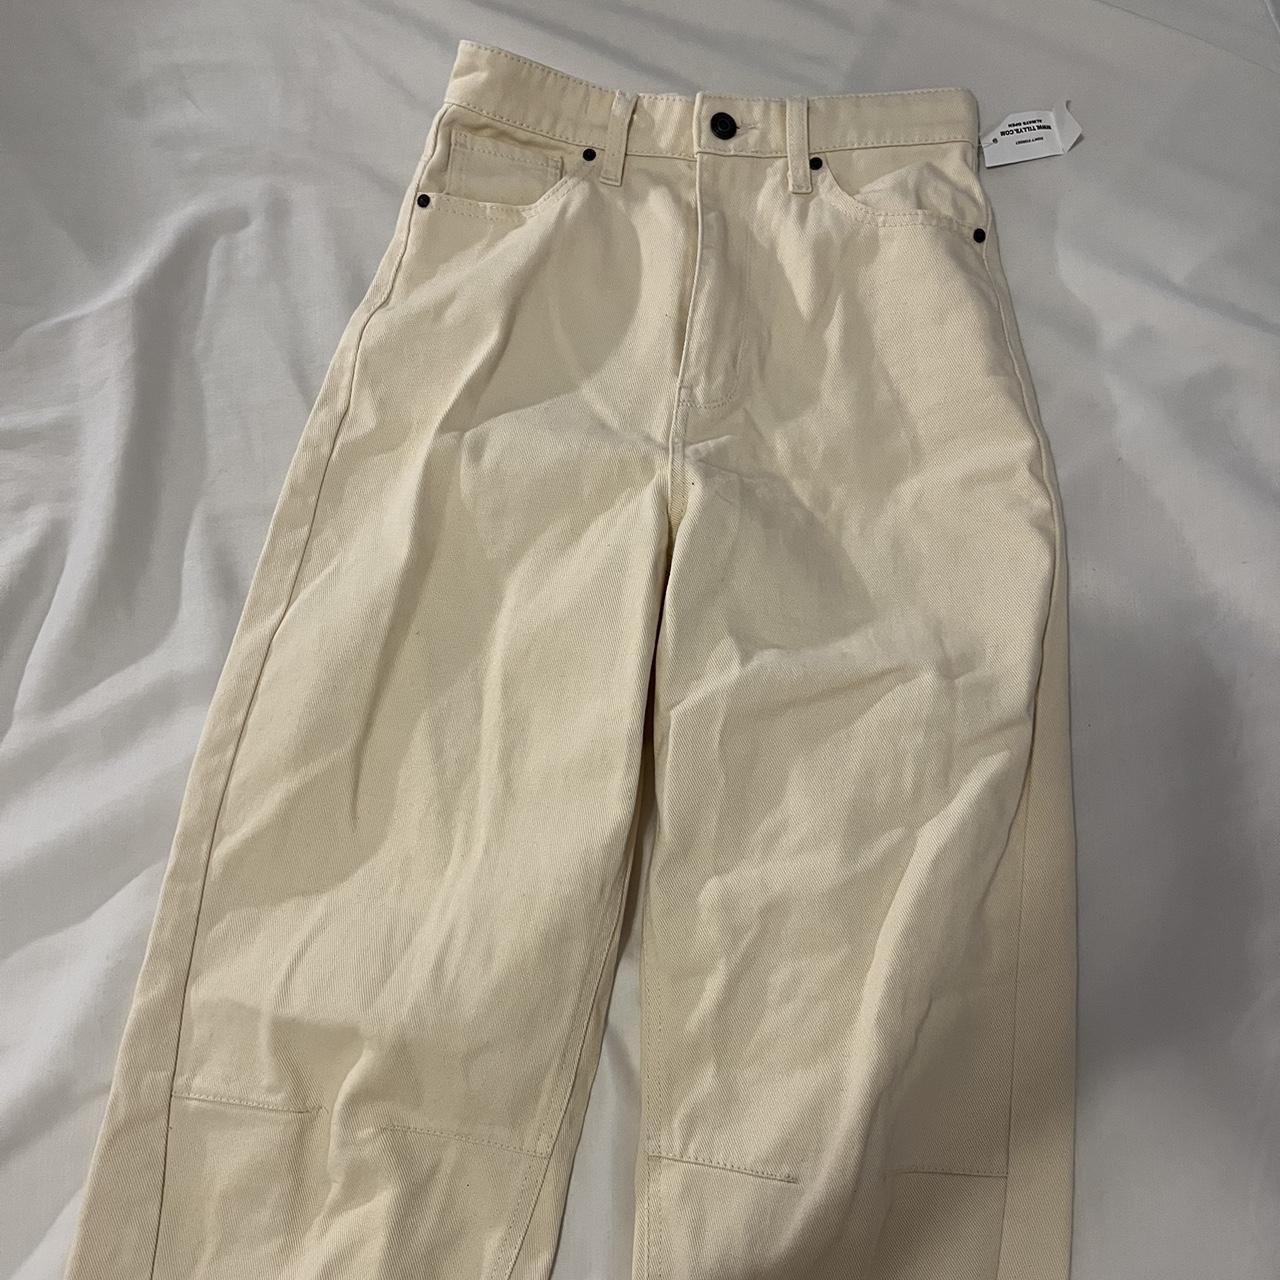 Tillys Women's Cream and Tan Jeans